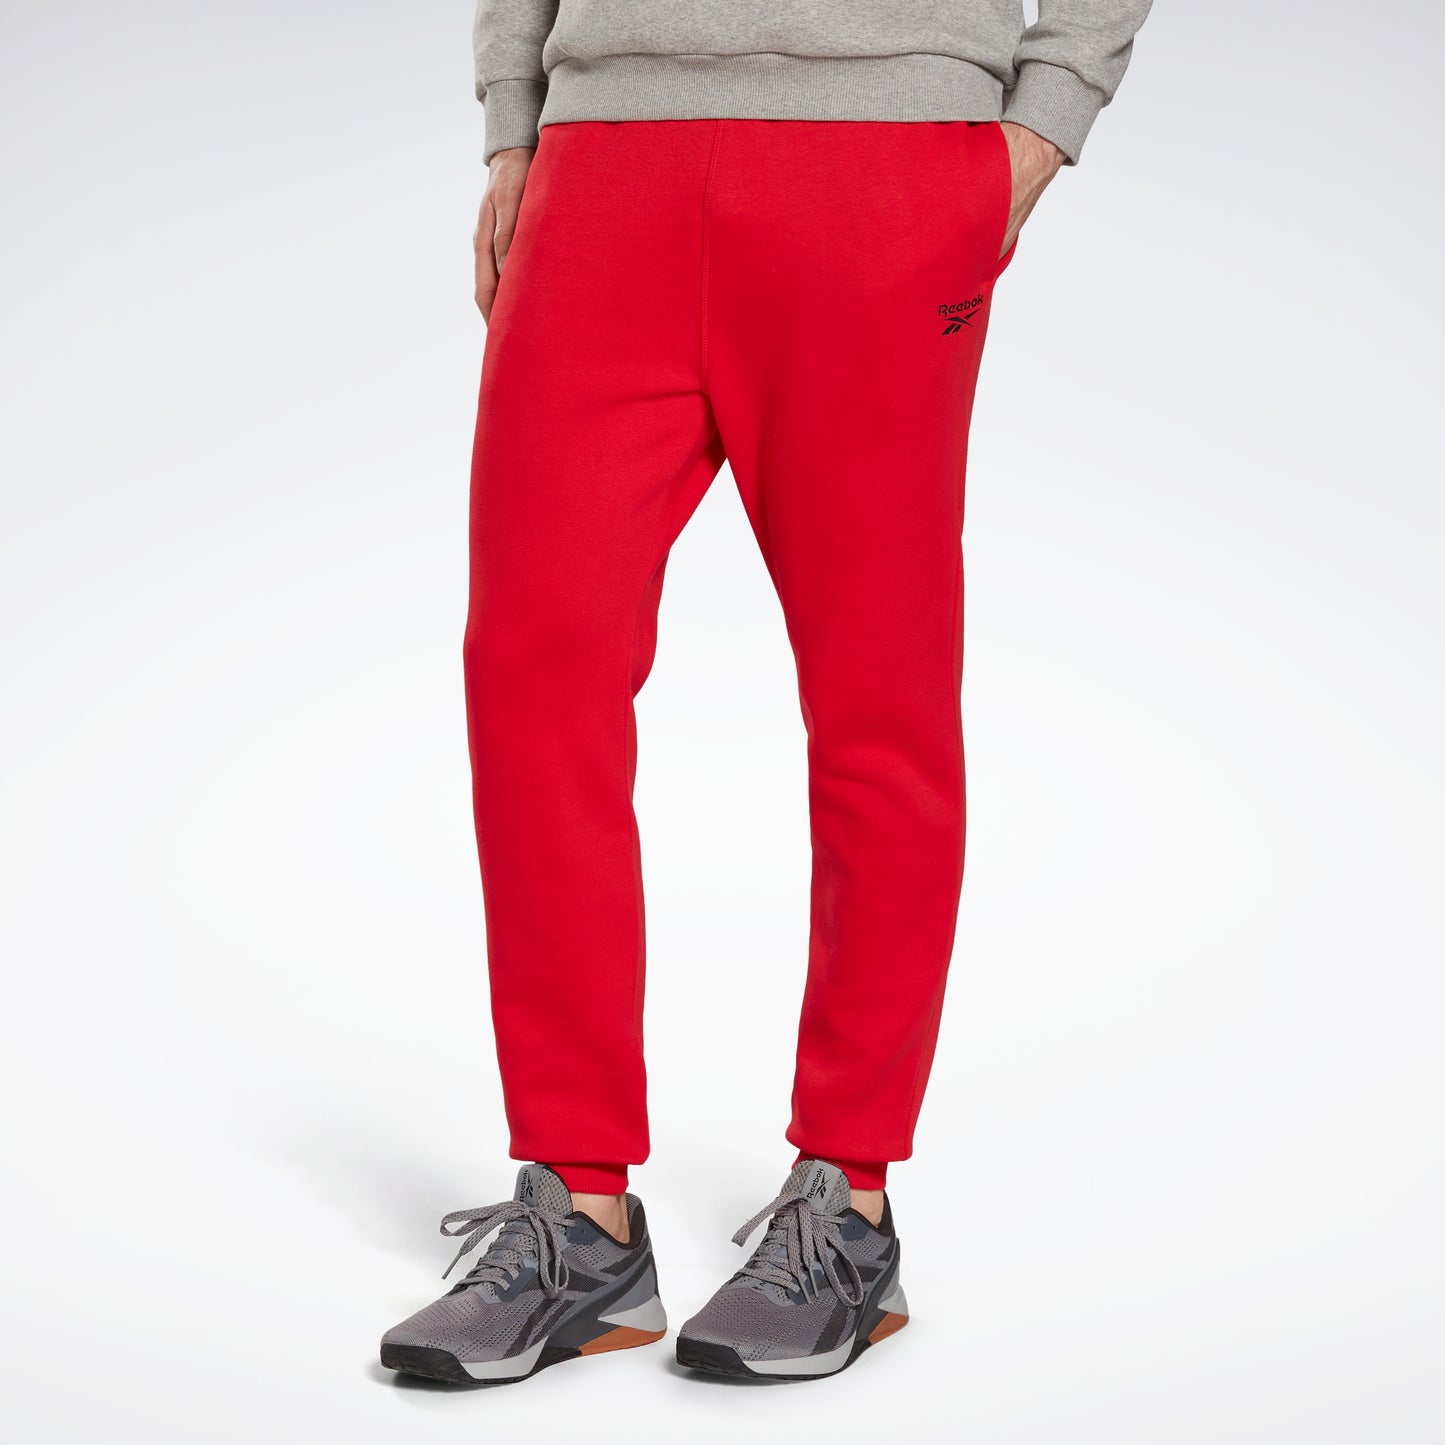 Reebok Men's Classics Twin Vector Track Pants in Radiant Red Size M -  Lifestyle Apparel